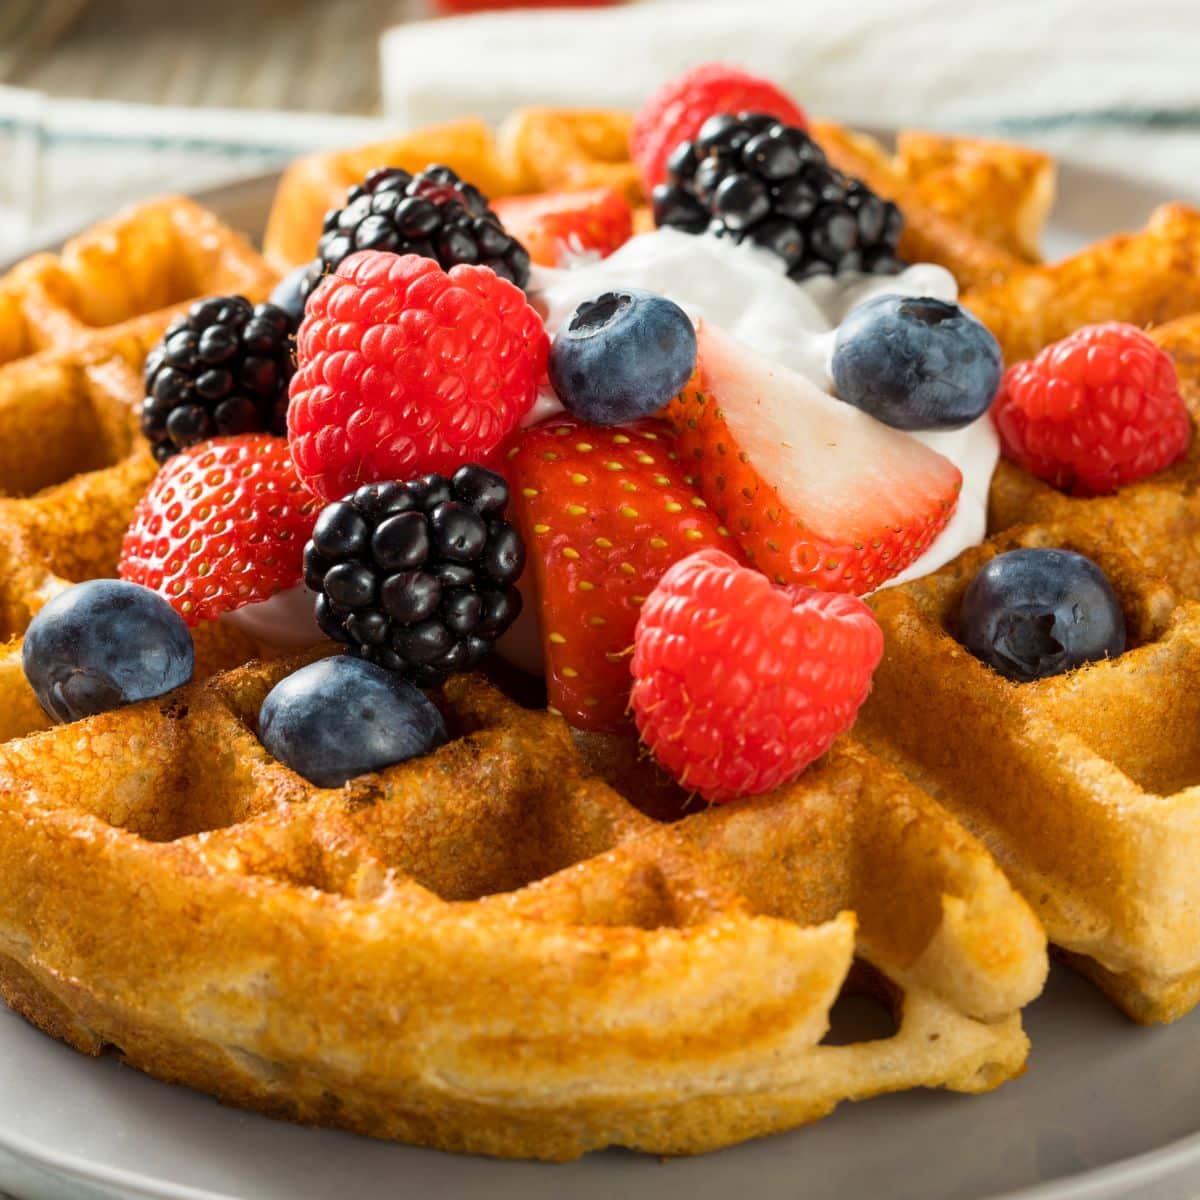 Square image of waffles with fruit on top.